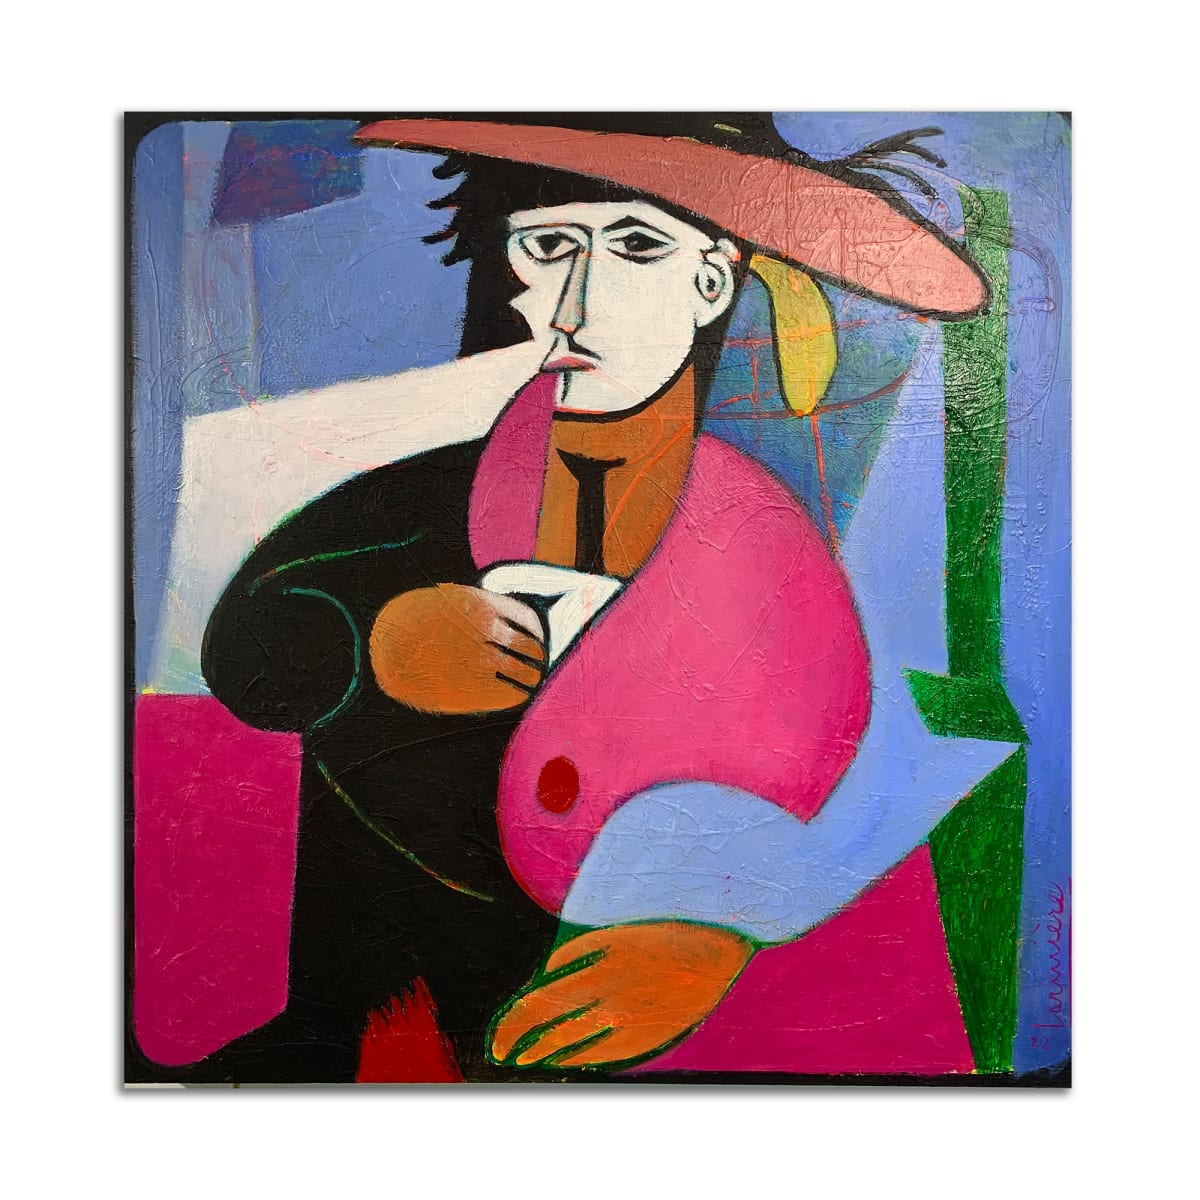 Picasso with a Pirate Hat Wearing a Magenta Fur Coat Holding a Sword #1 by François Larivière 